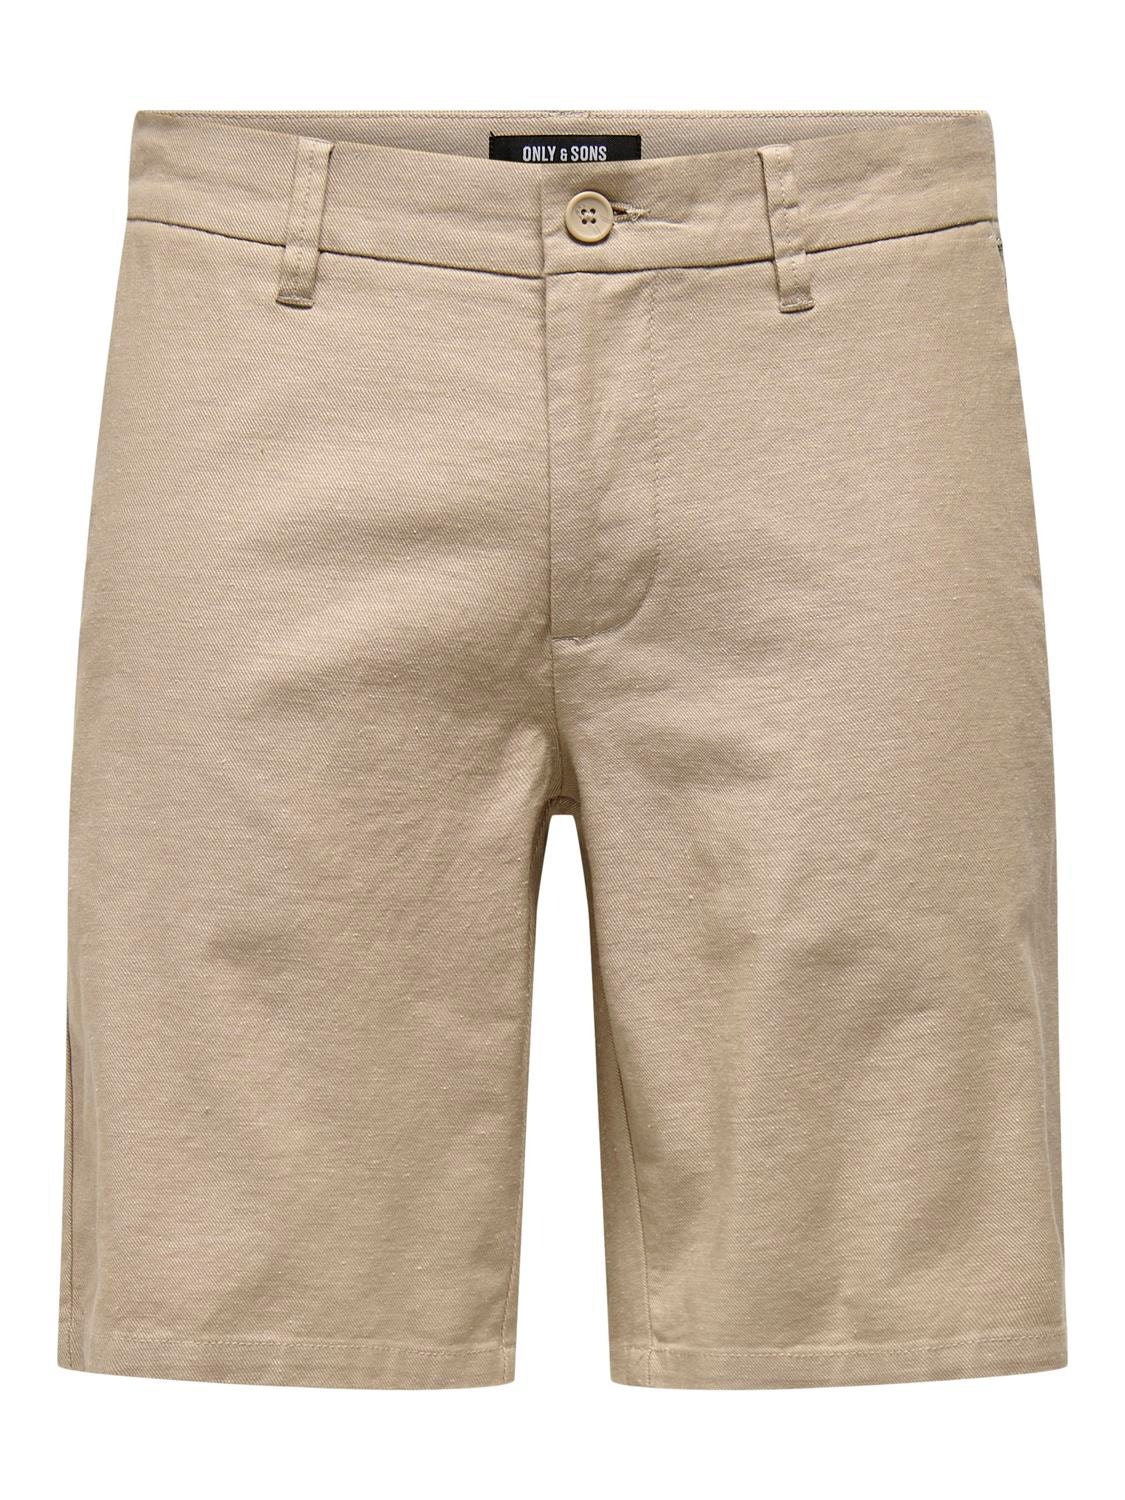 ONLY & SONS Regular Fit Linen Shorts -Chinchilla - 22024940